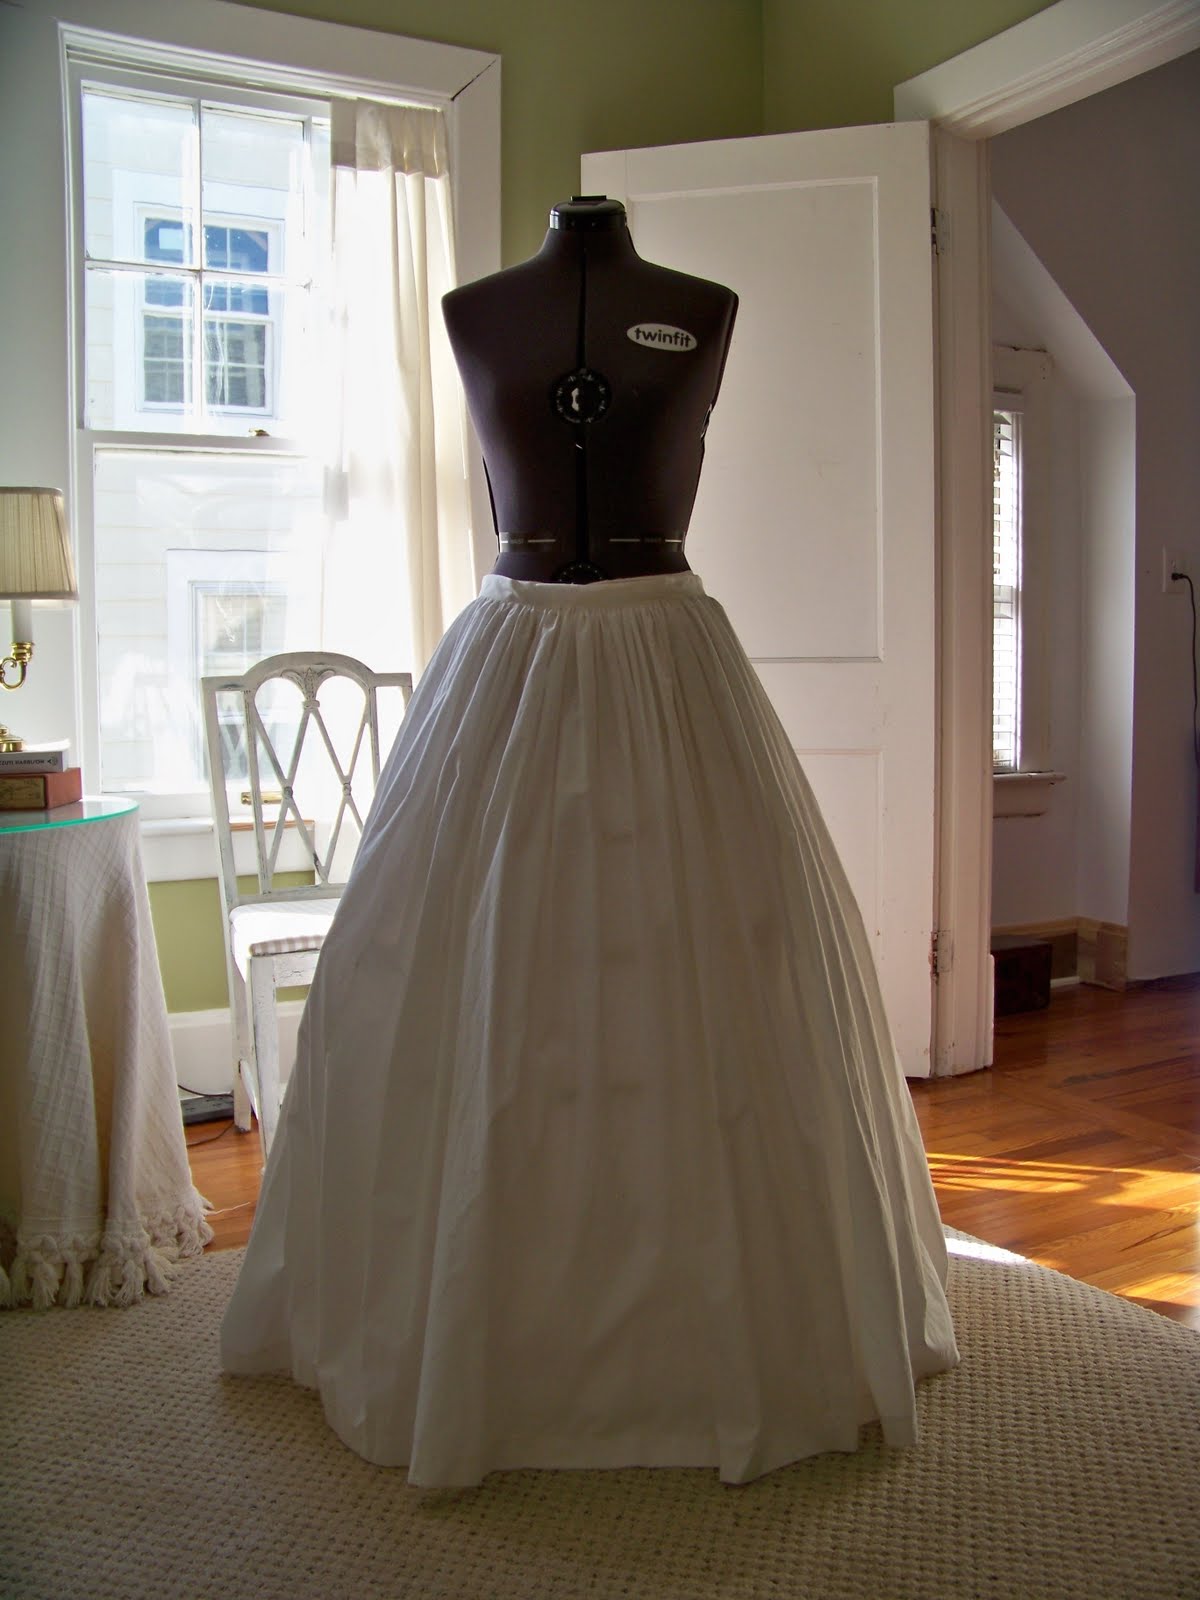 Finished the Petticoat for my Wedding Dress - self drafted : r/sewing